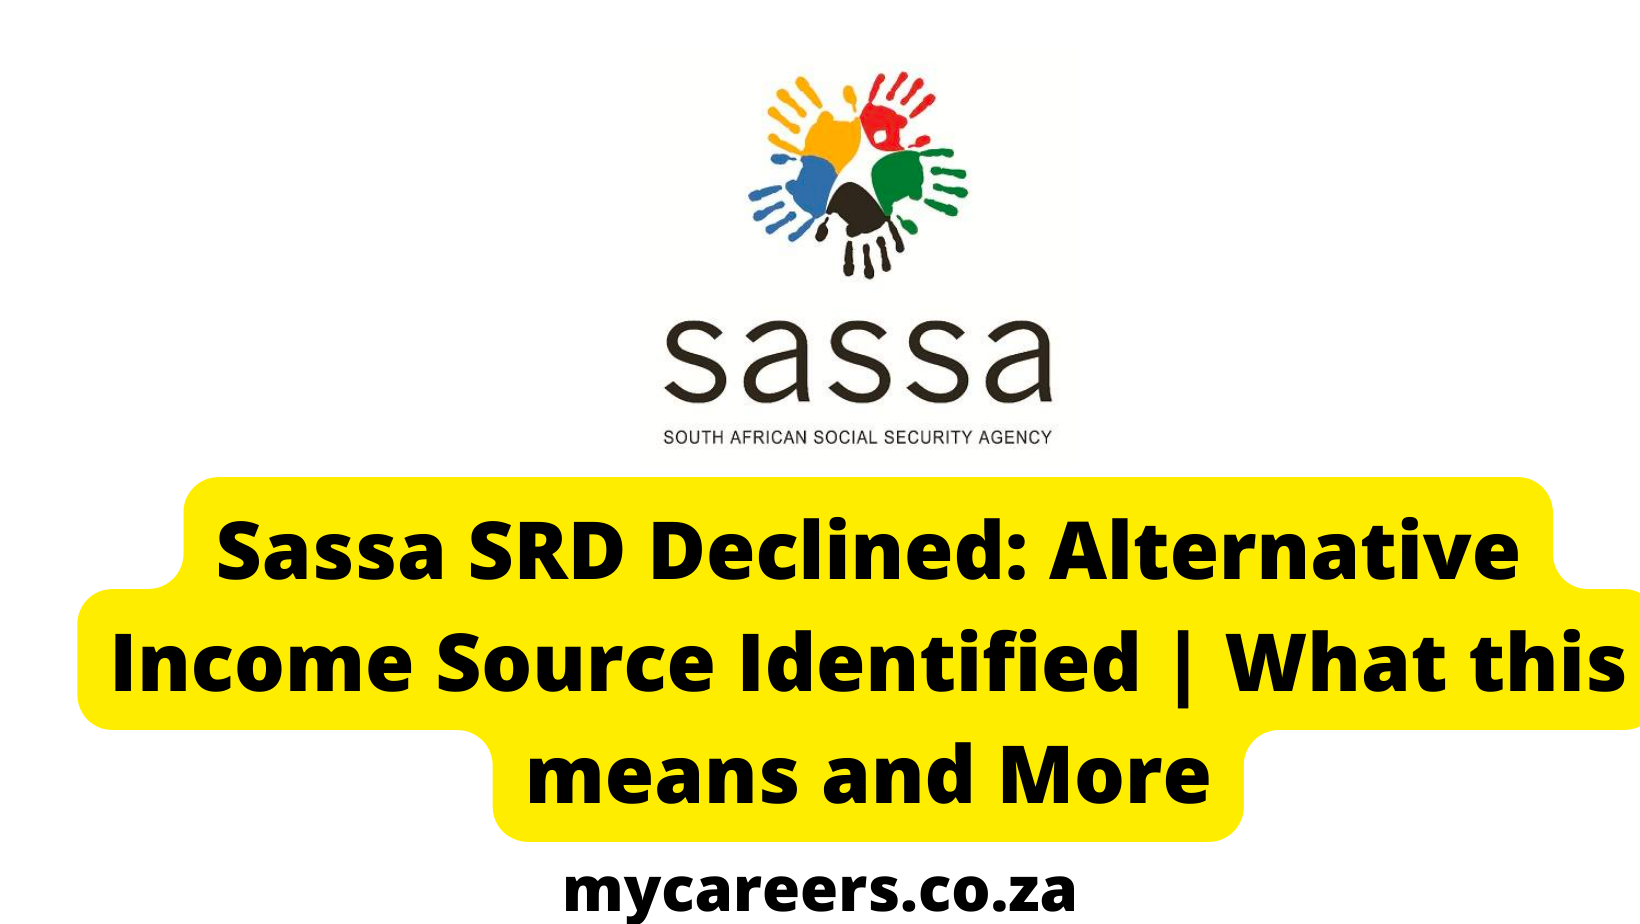 Sassa SRD Declined: Alternative Income Source Identified | What this means and More